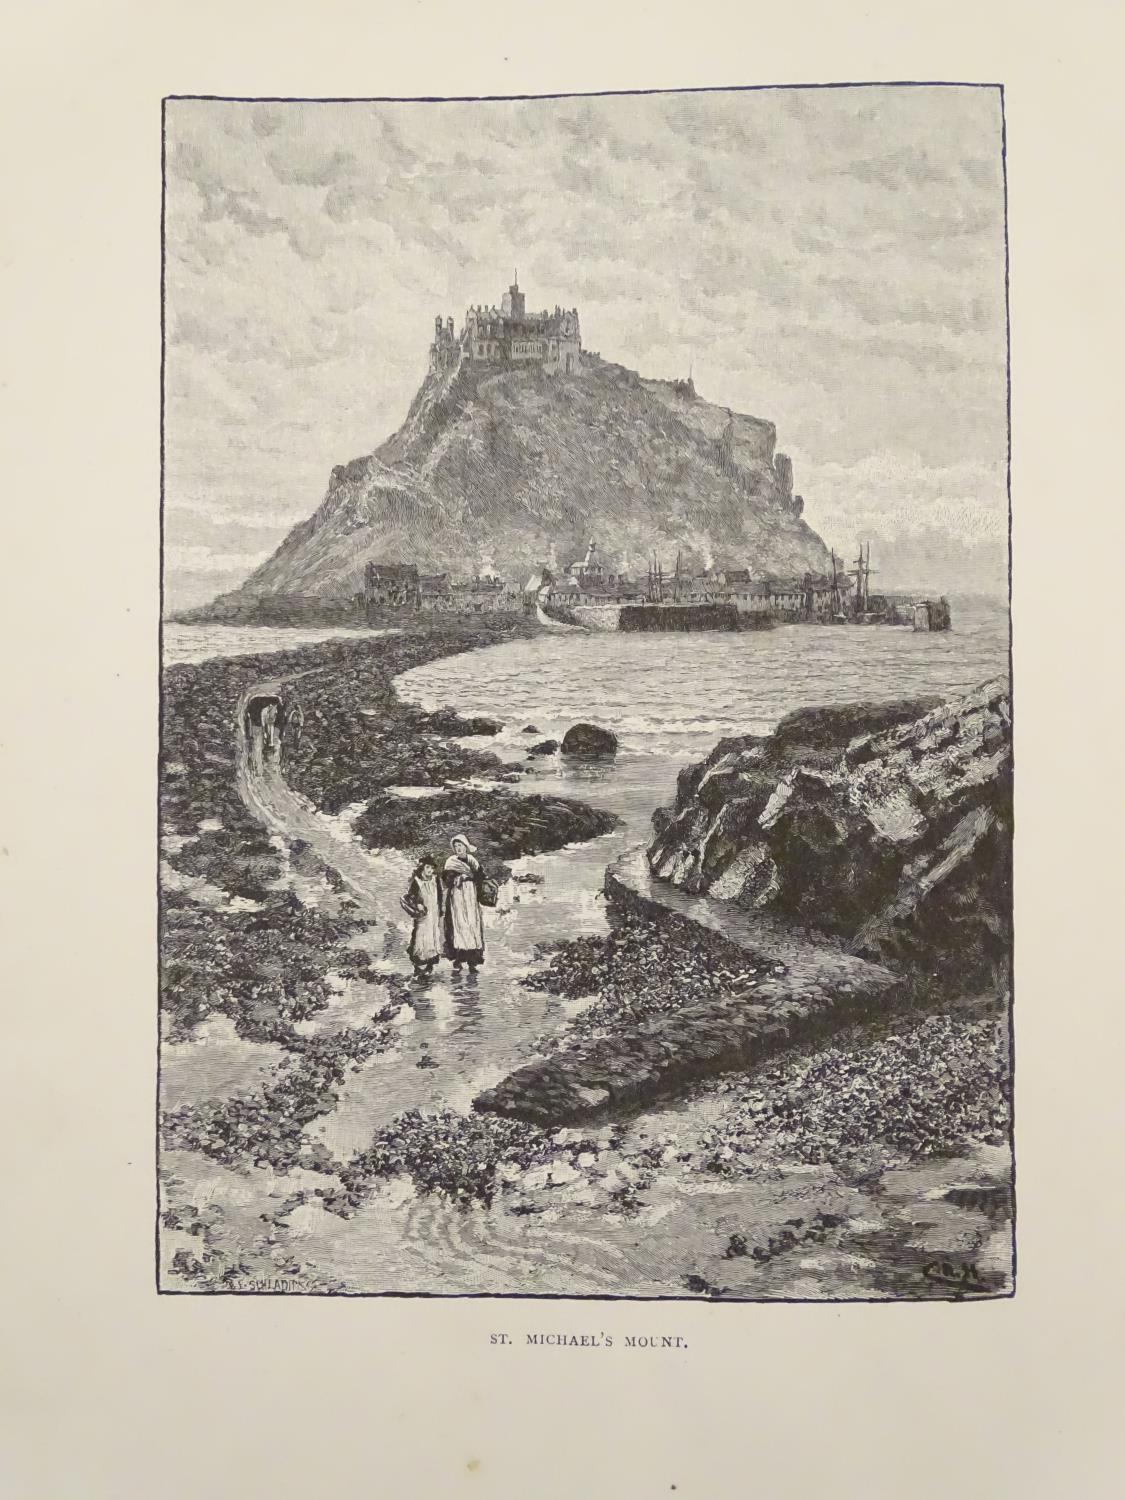 Book: An Unsentimental Journey through Cornwall, by Dinah Mulock Craik, illustrated by C. Napier - Image 3 of 7